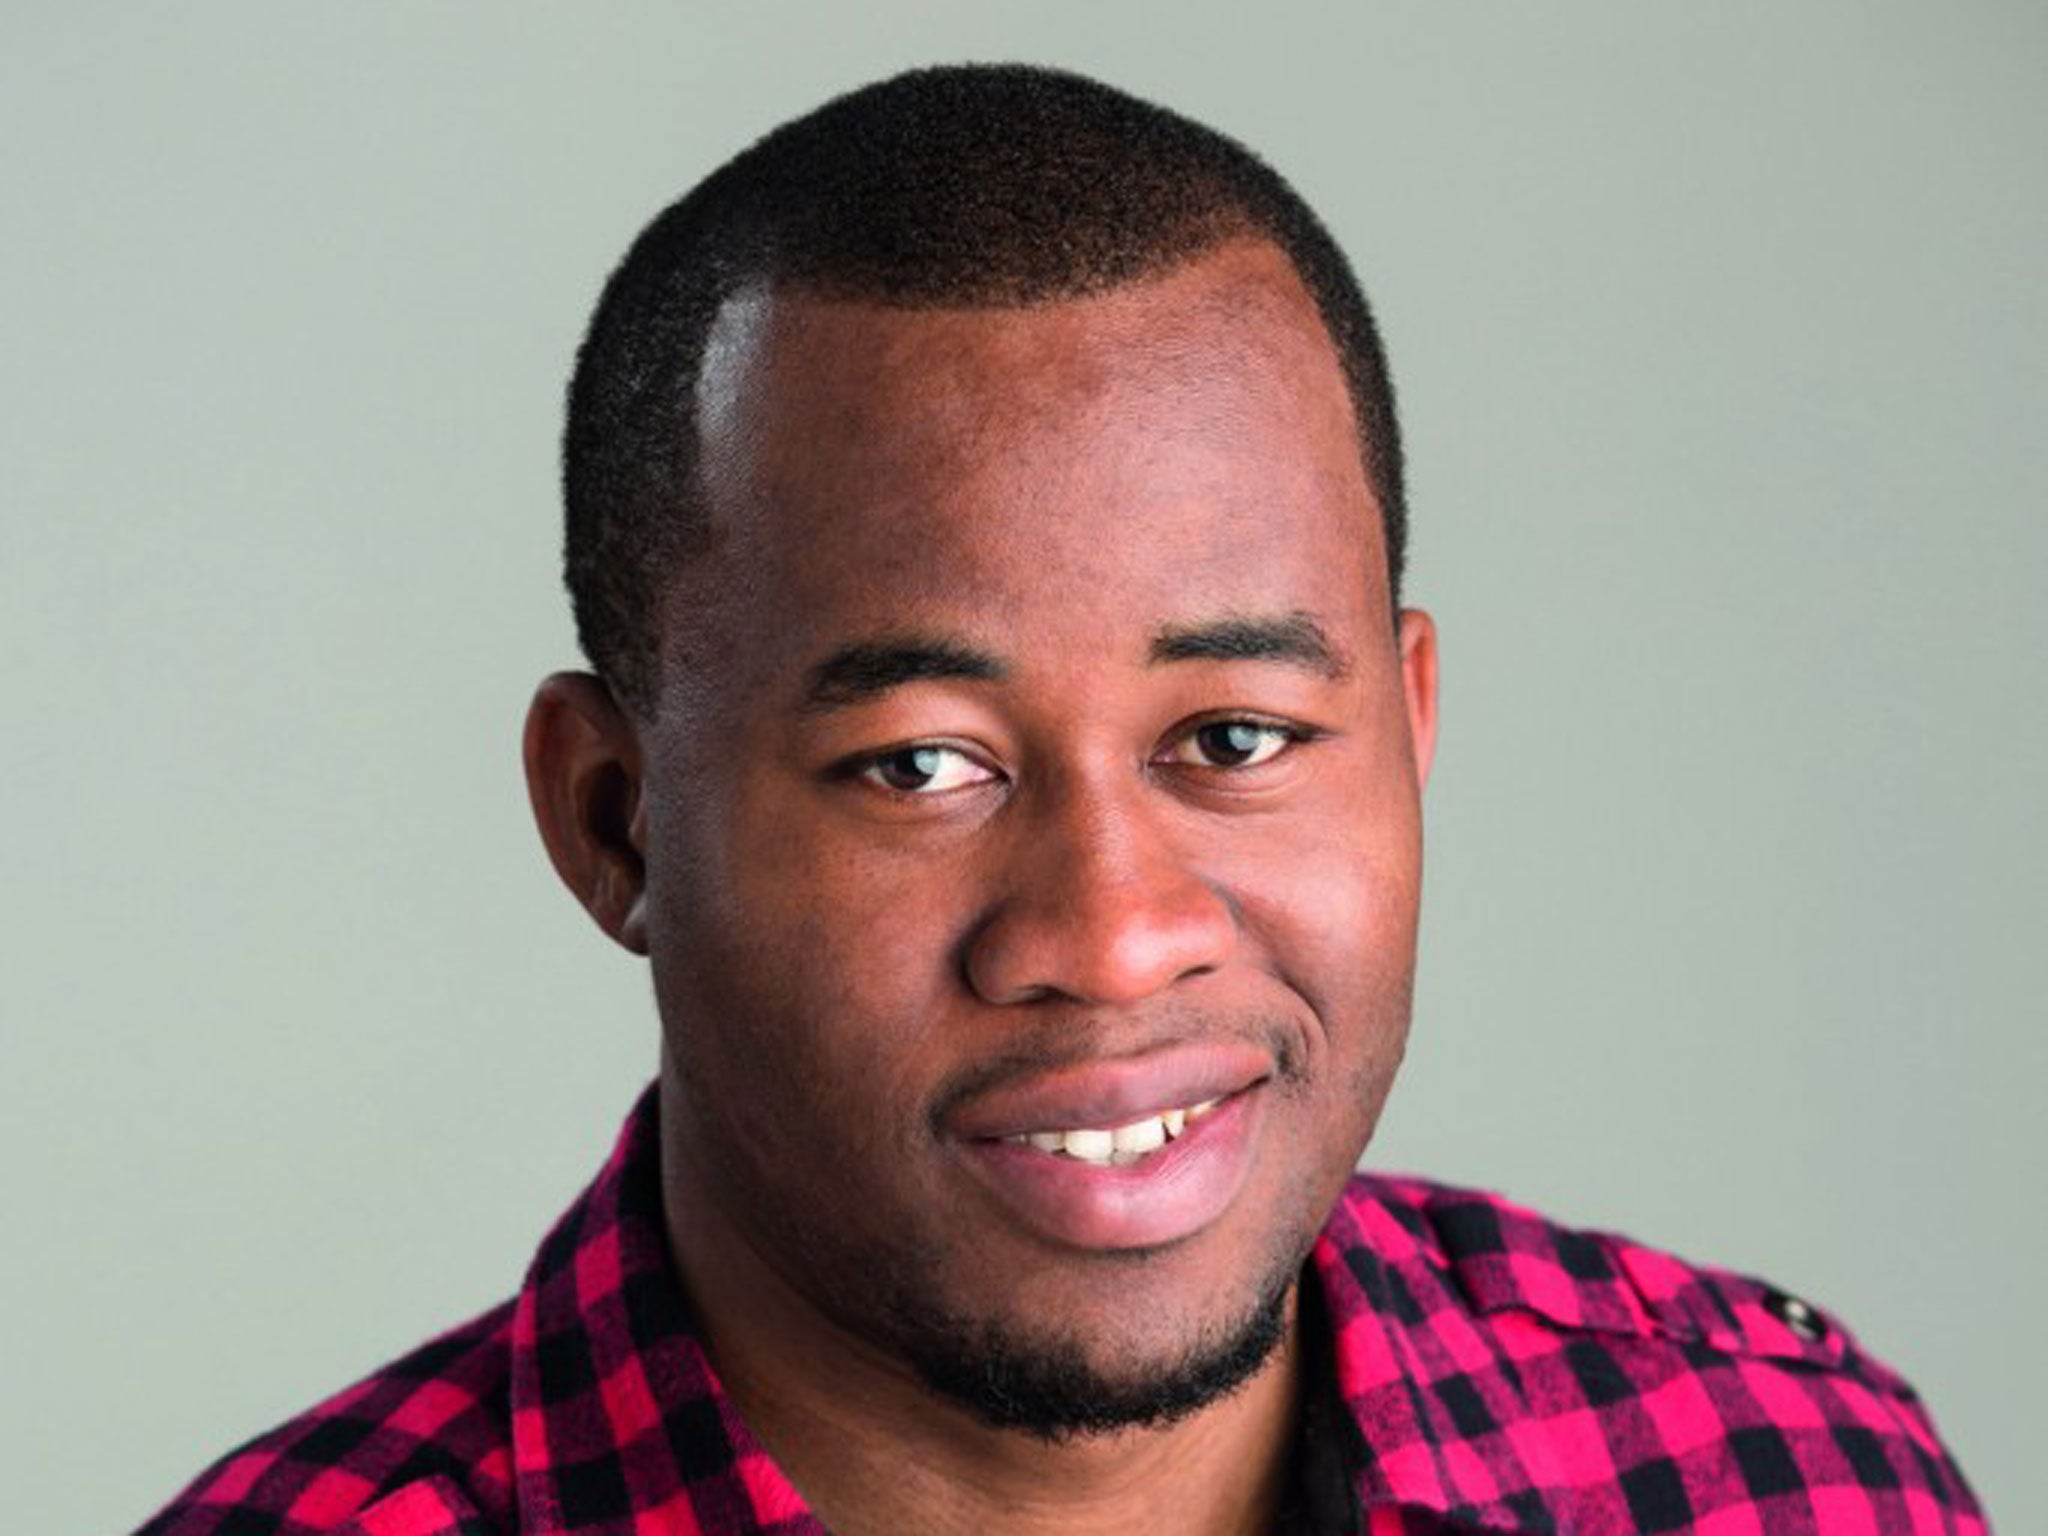 Obioma's book 'The Fisherman' was shortlisted for the Man Booker prize 2015